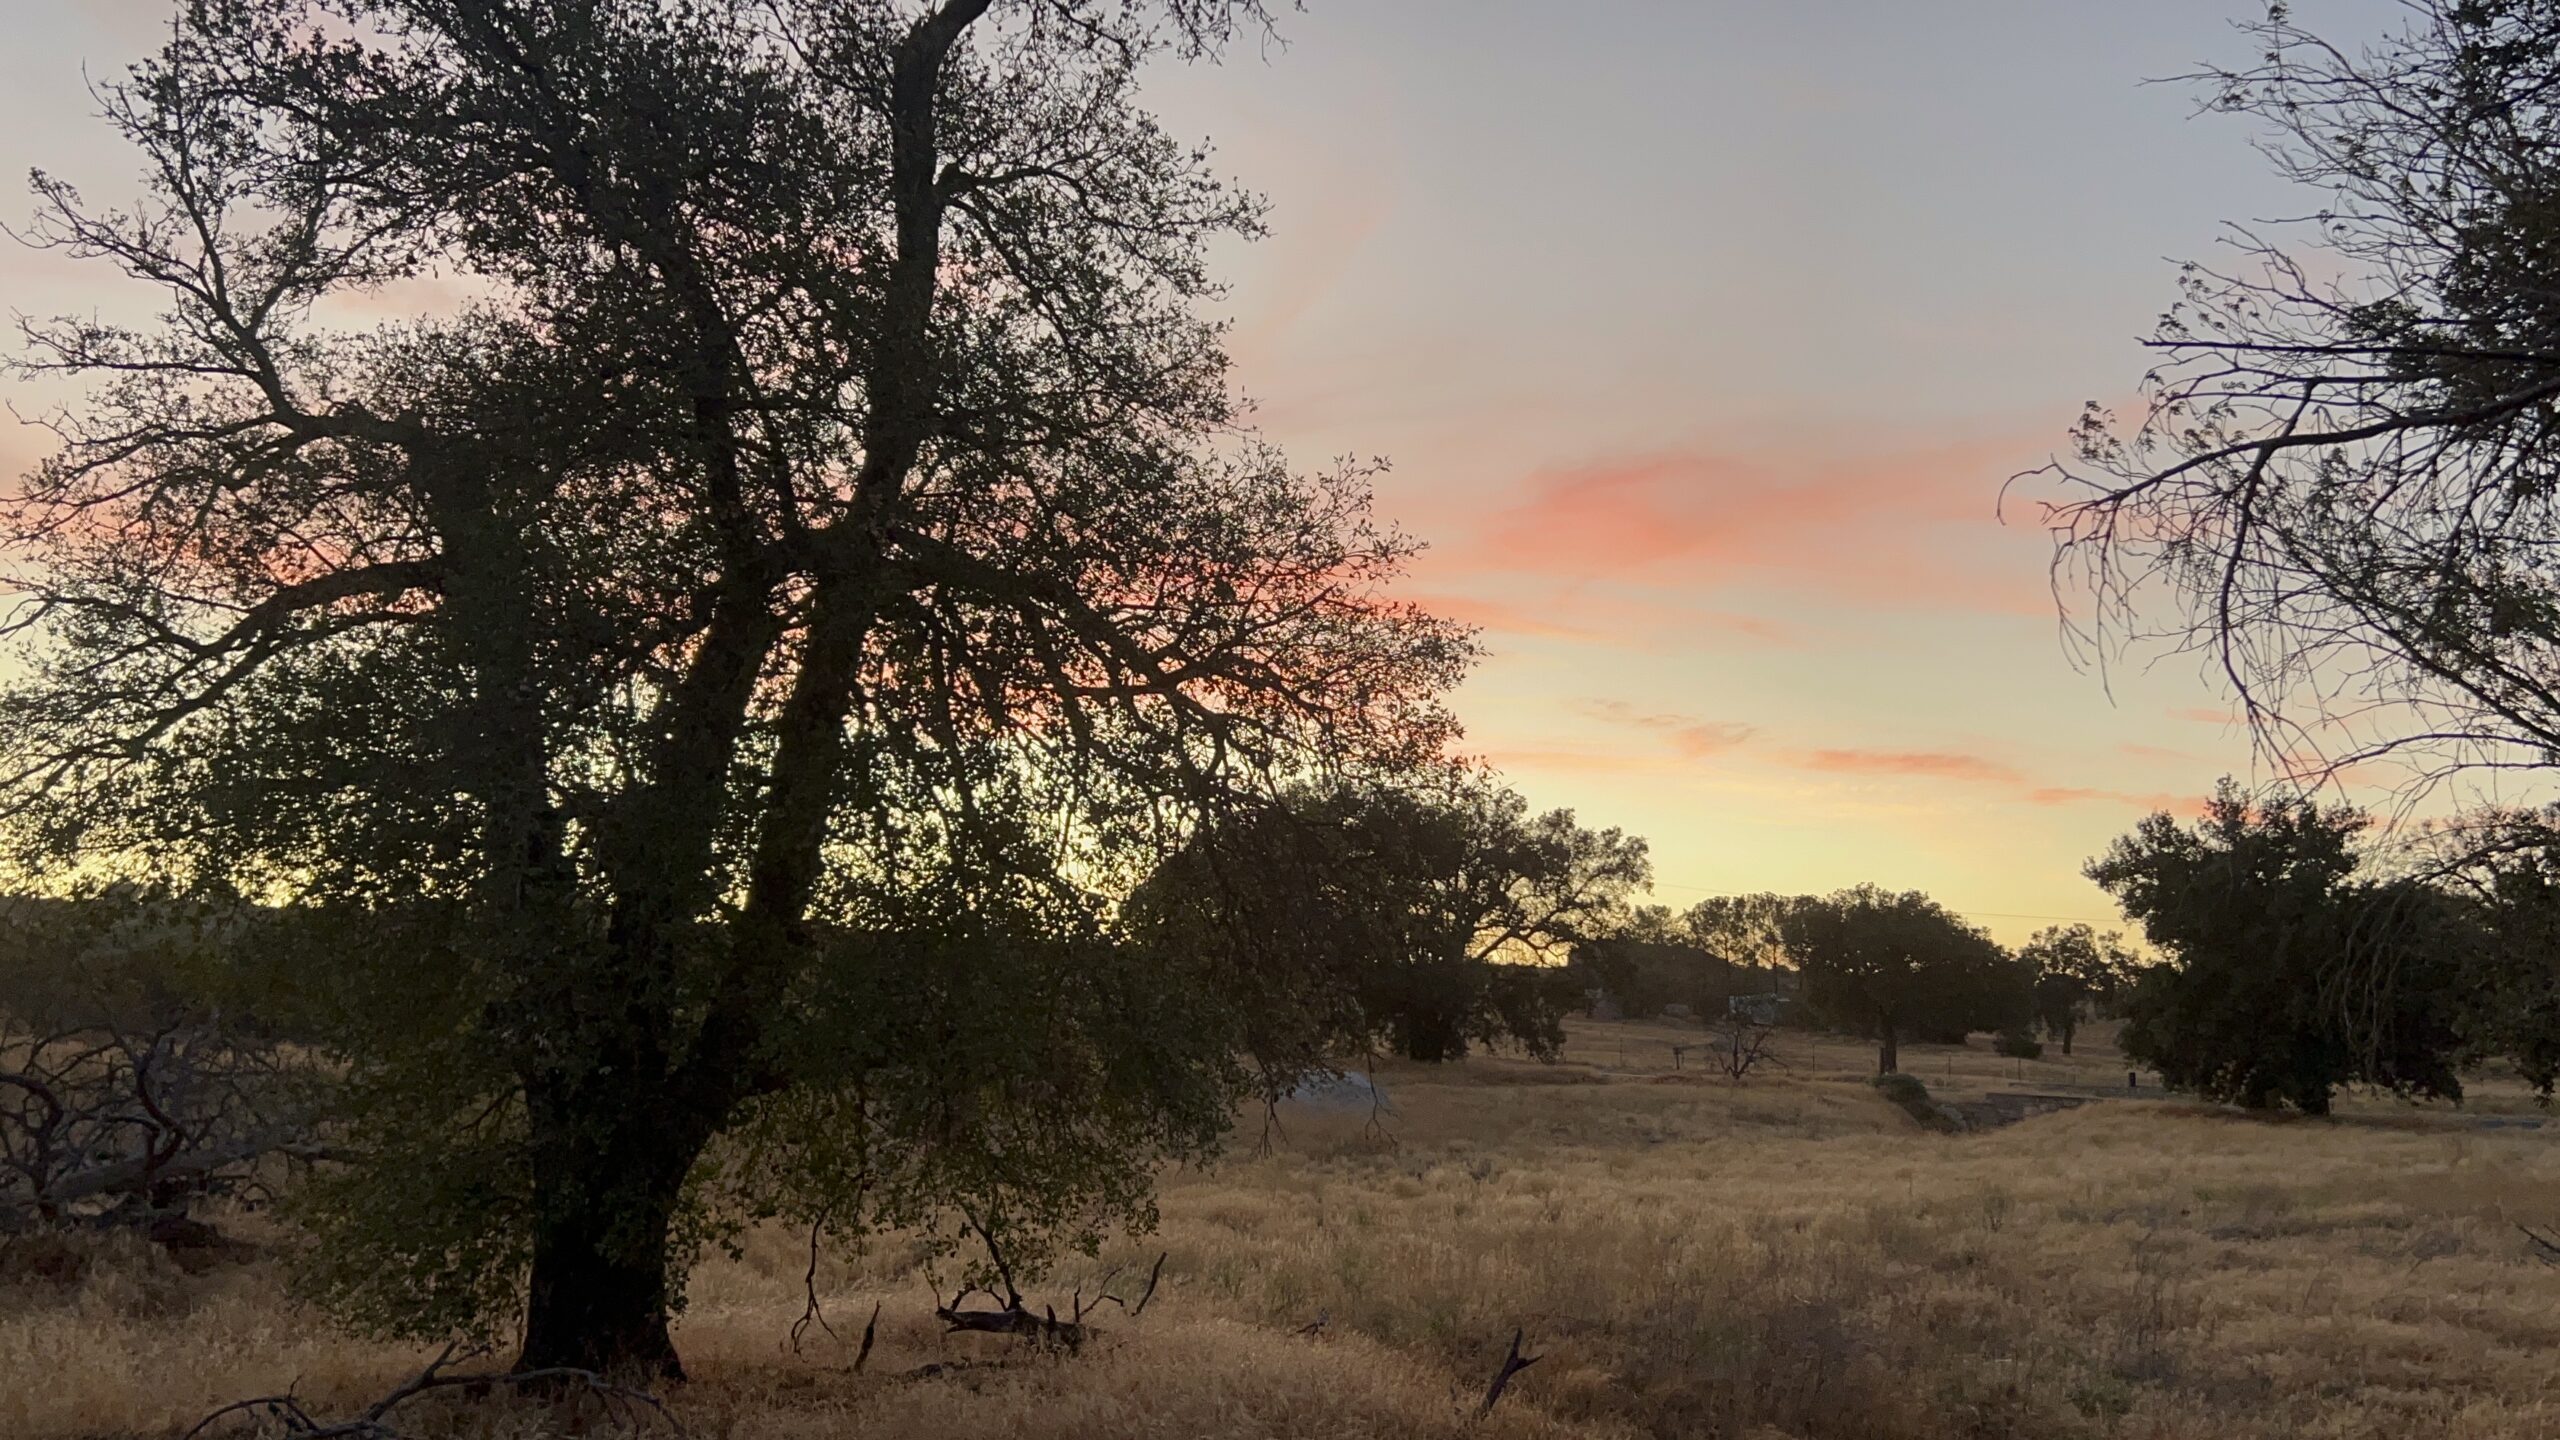 Twilight whispers among the oaks: a serene landscape bathed in the gentle glow of a setting sun, painting the sky in soft hues of pink and orange - a testament to HumanityOne's mission